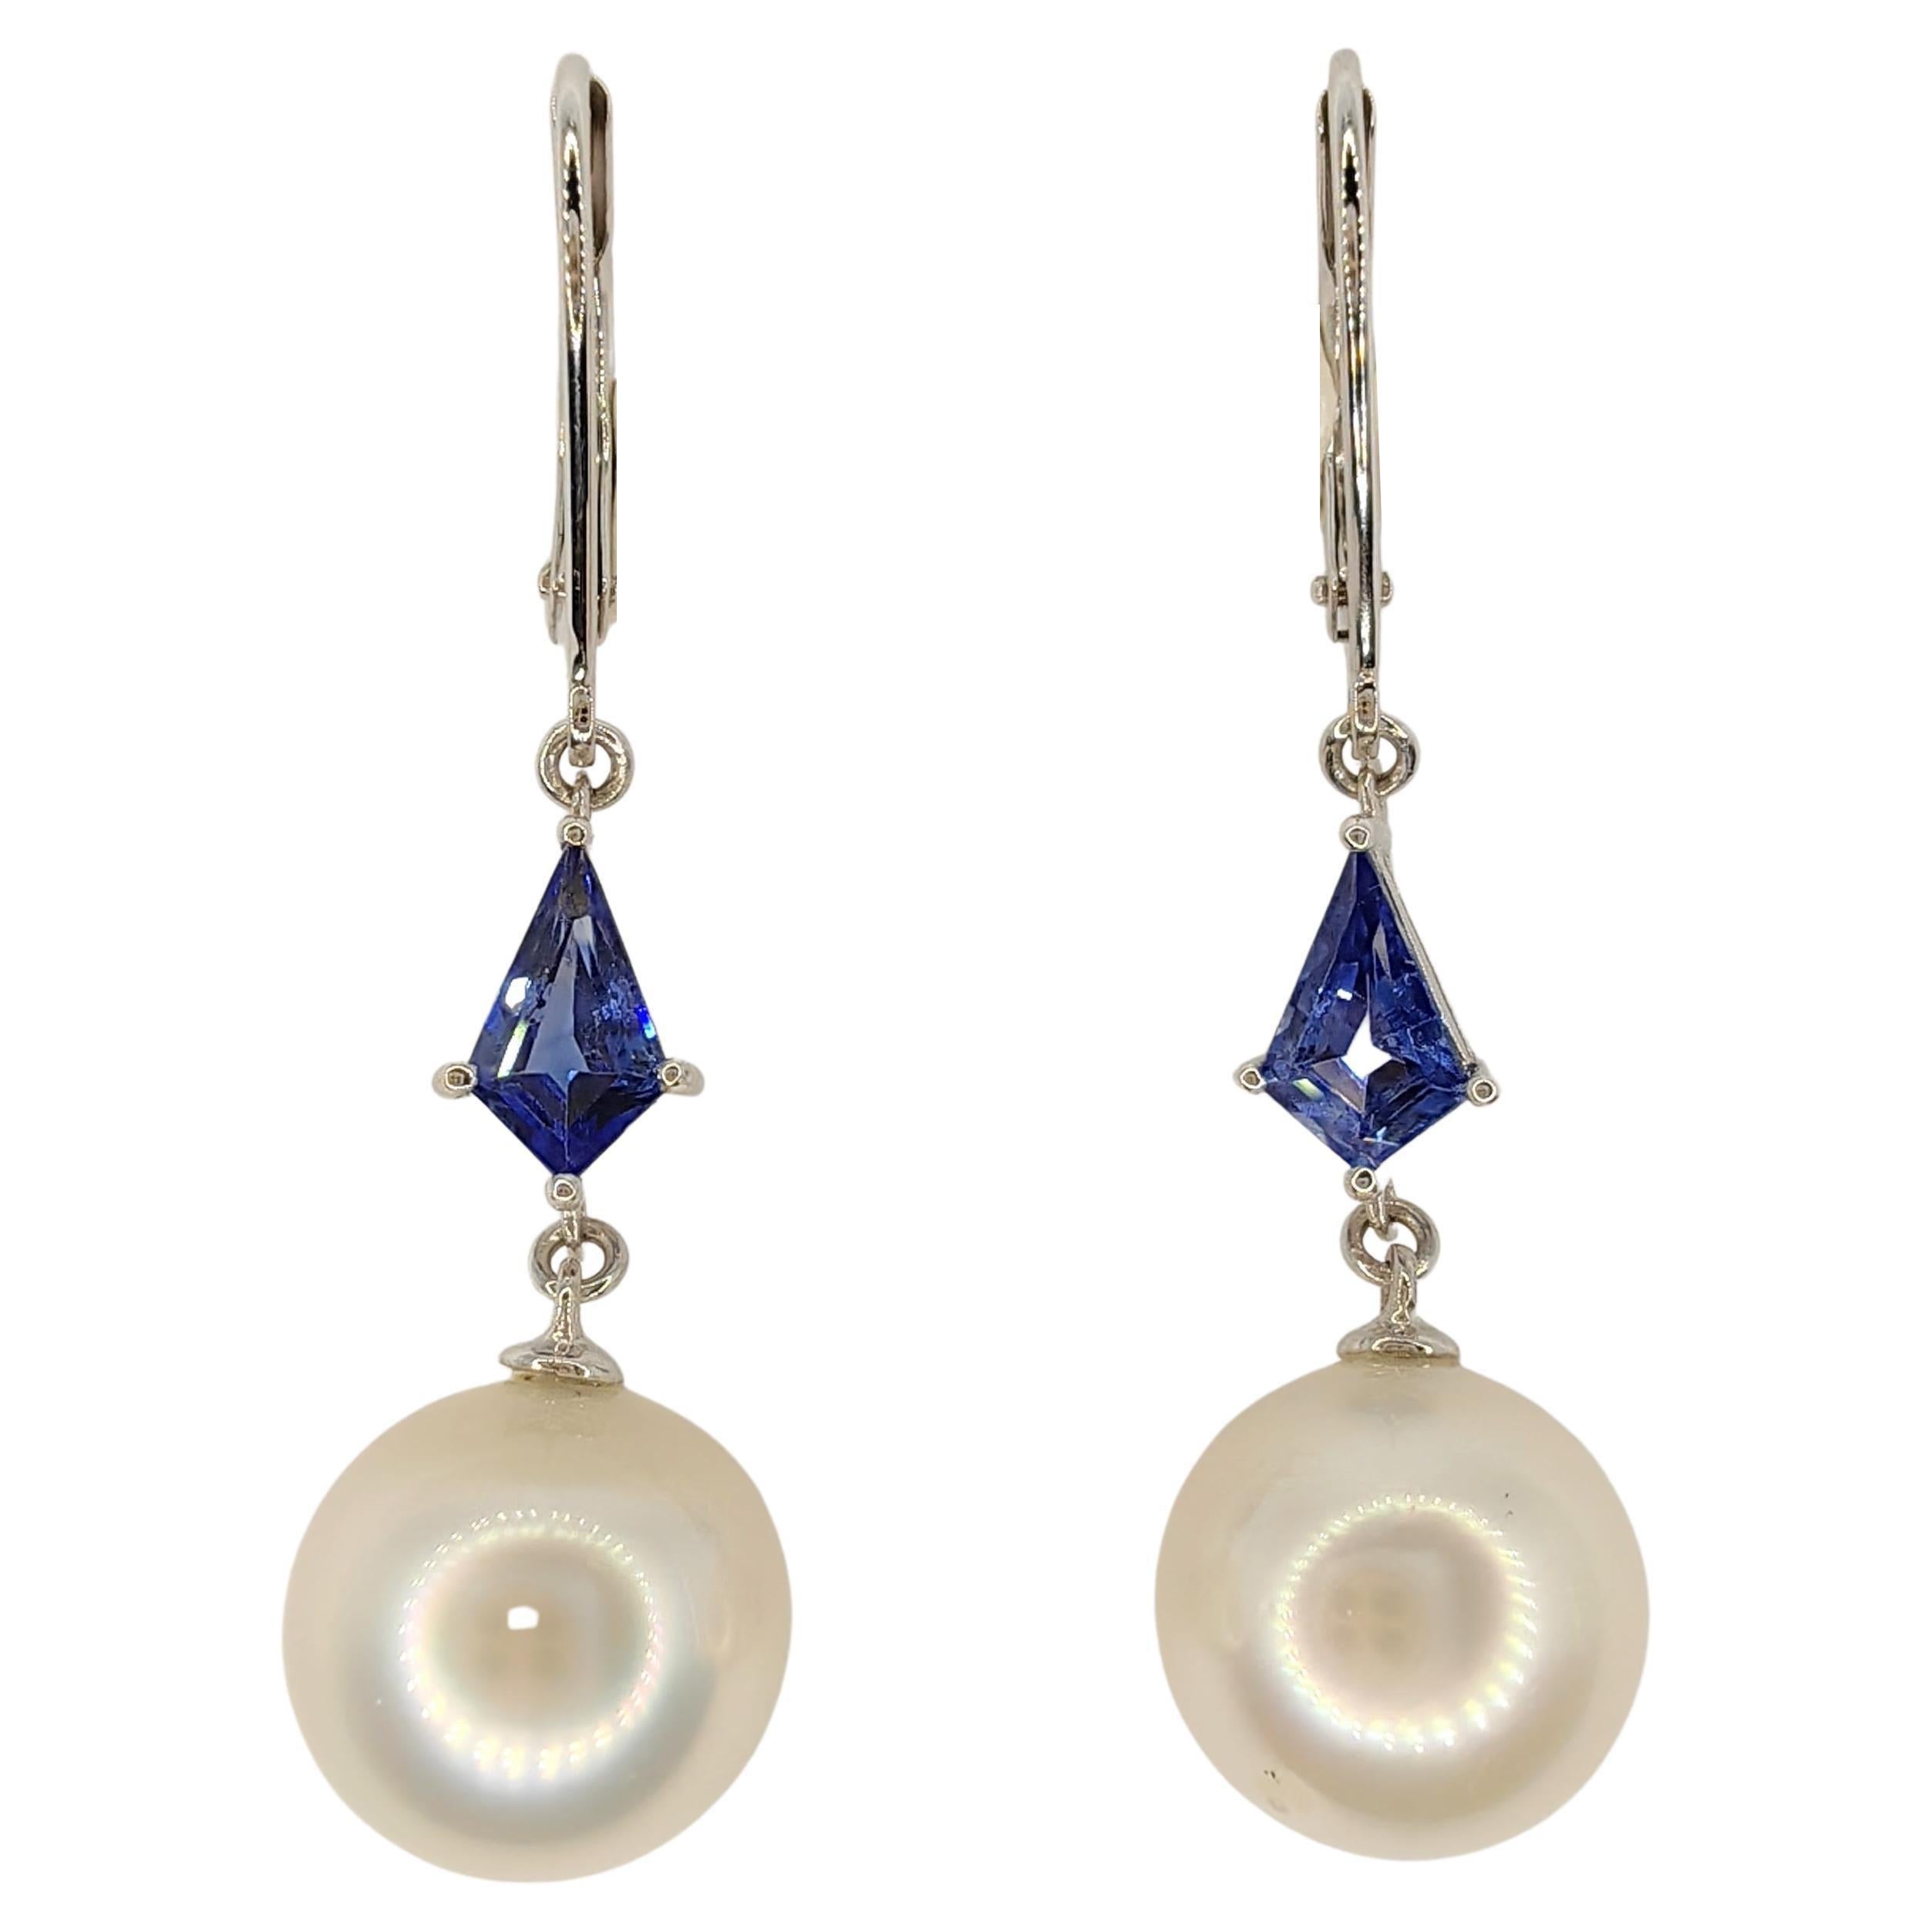 10mm Natural Pearl & Kite Cut Blue Sapphire Dangling Earrings in 18K White Gold For Sale